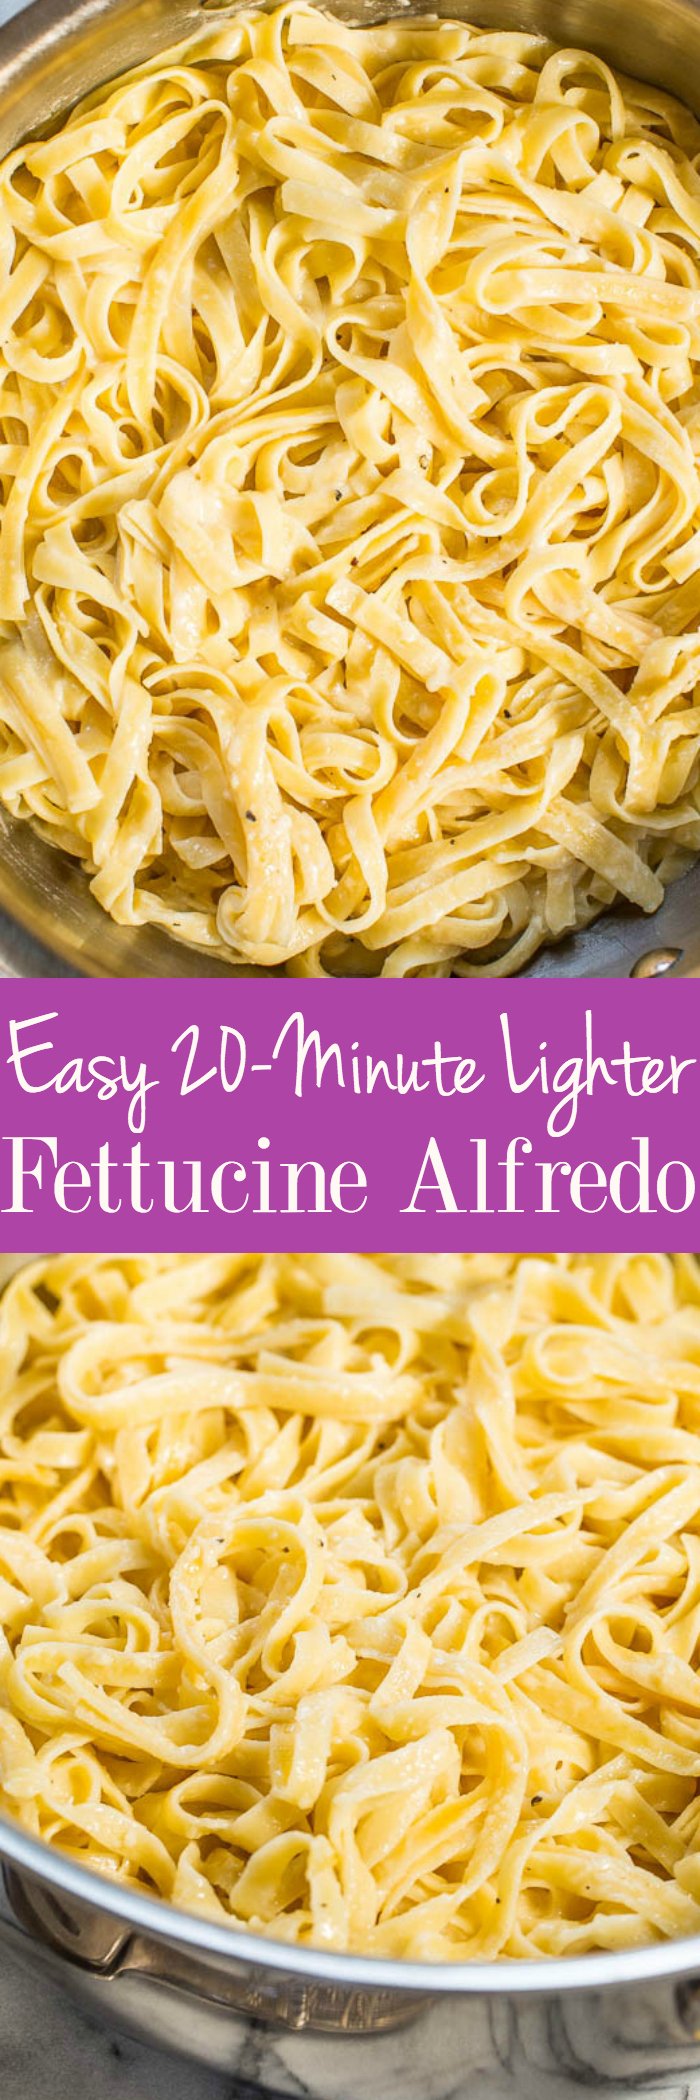 Easy 20-Minute Lighter Fettucine Alfredo - The creamy and cheesy taste you crave minus the extra fat and calories!! A fast and easy recipe that's perfect for busy weeknights that everyone loves!!